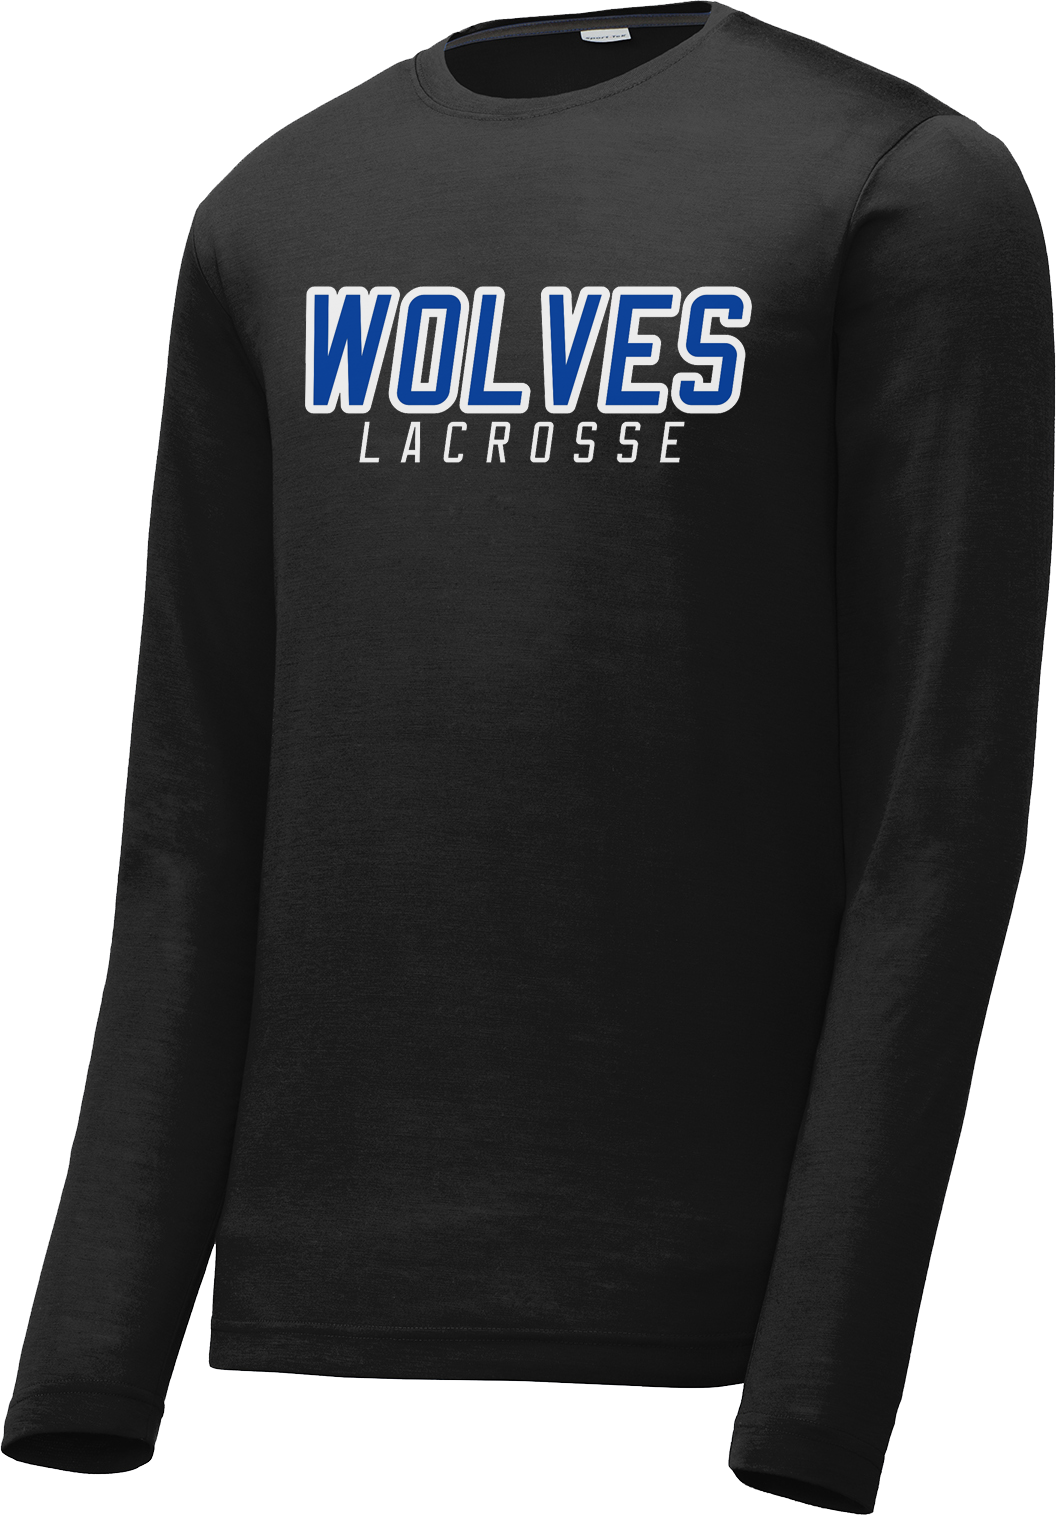 West Houston Wolves Long Sleeve CottonTouch Performance Shirt